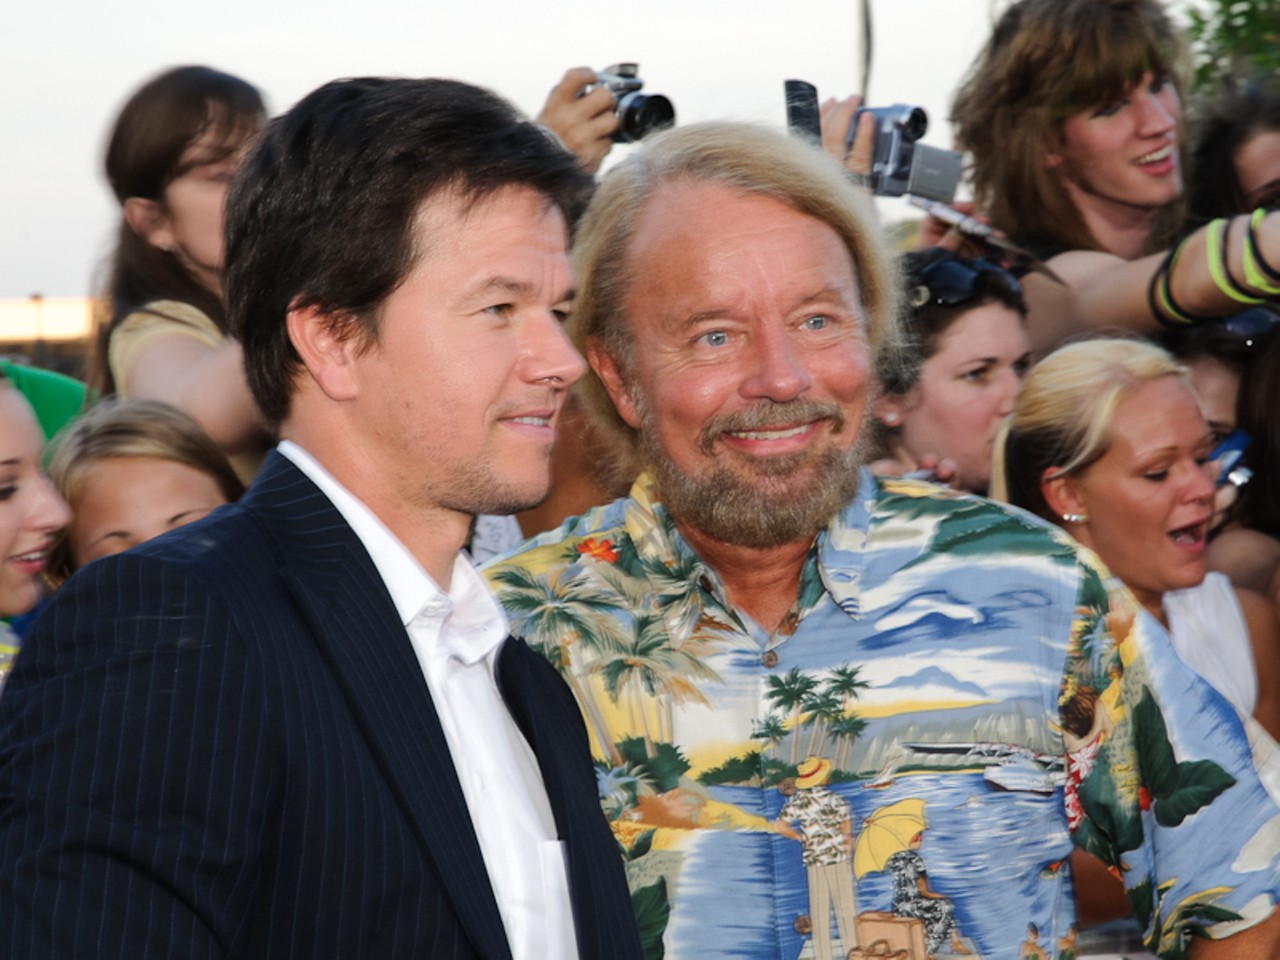 Mark Wahlberg and Joe Edwards pose for photos on the red carpet.